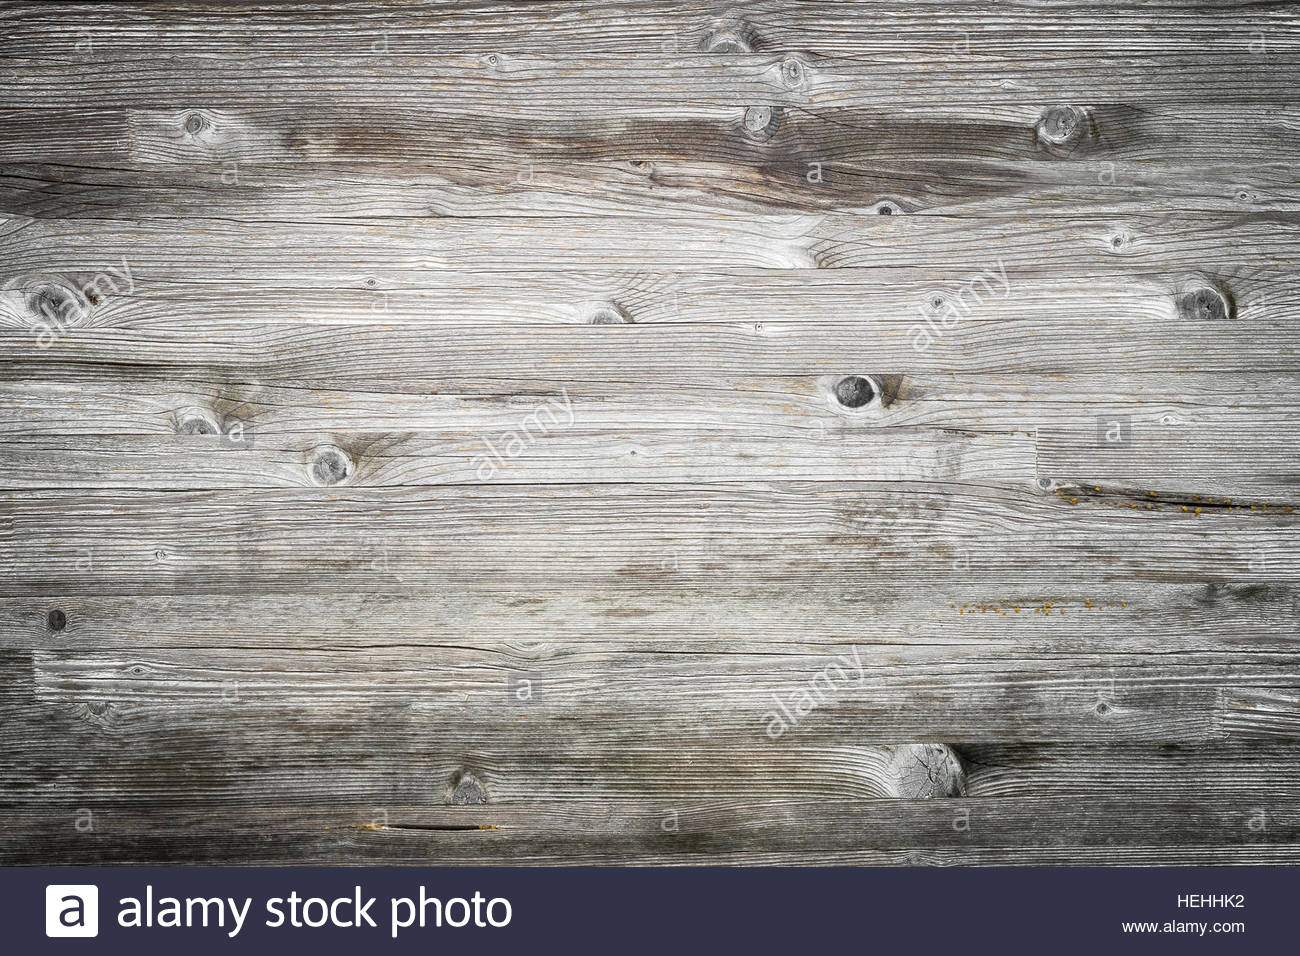 Wooden Planks Overlay Texture For Your Design Shabby Chic Stock